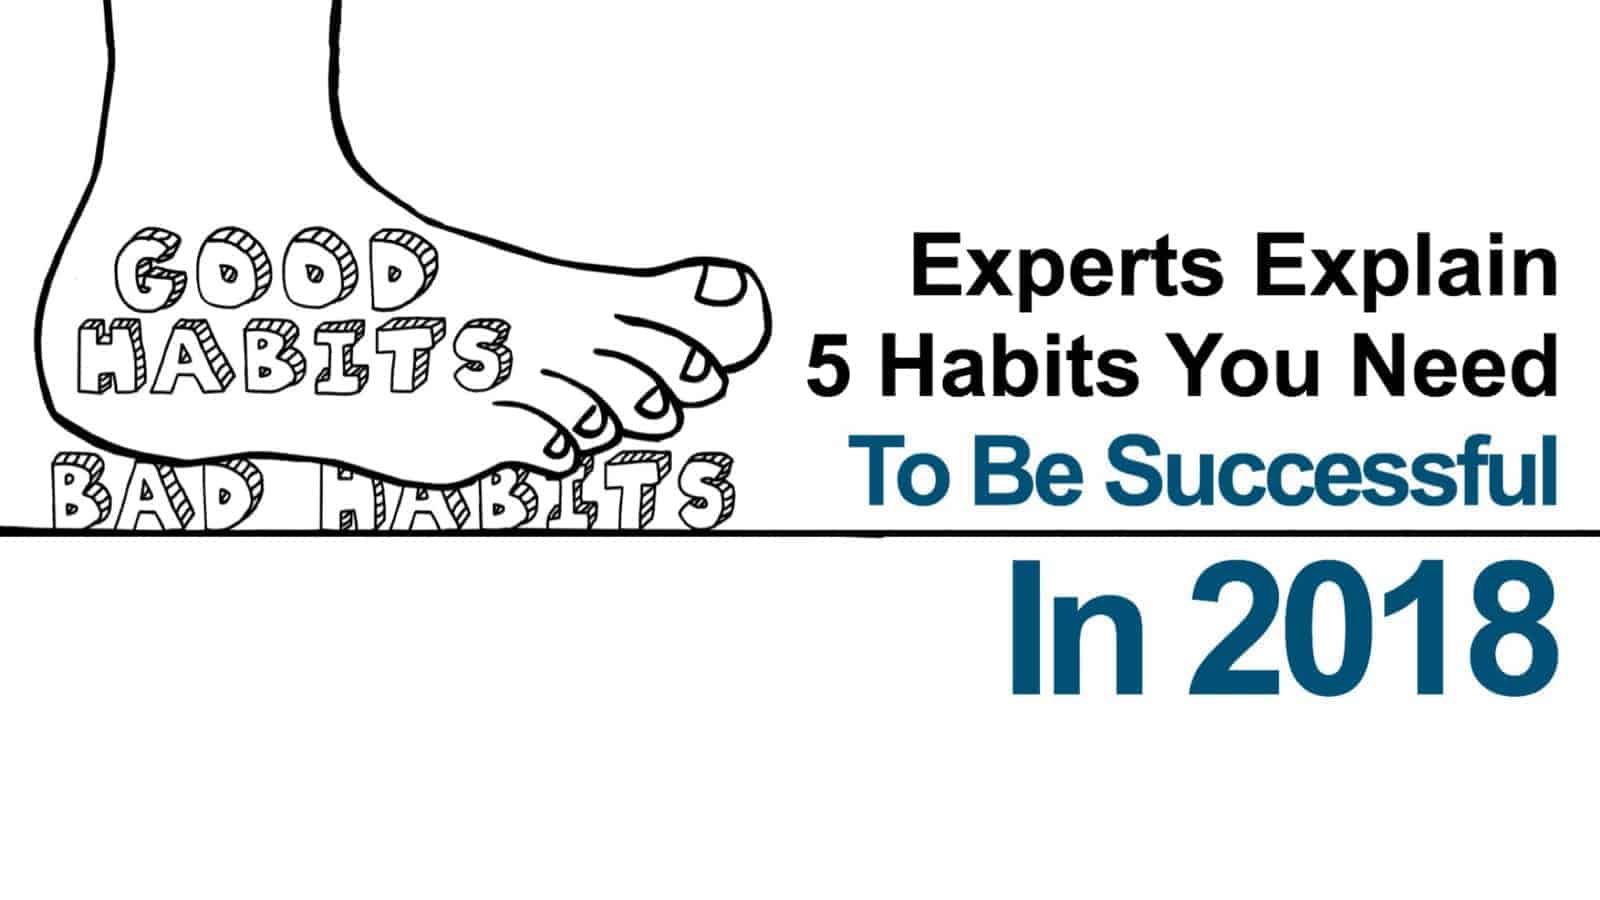 Experts Explain 5 Habits You Need To Be Successful In 2018